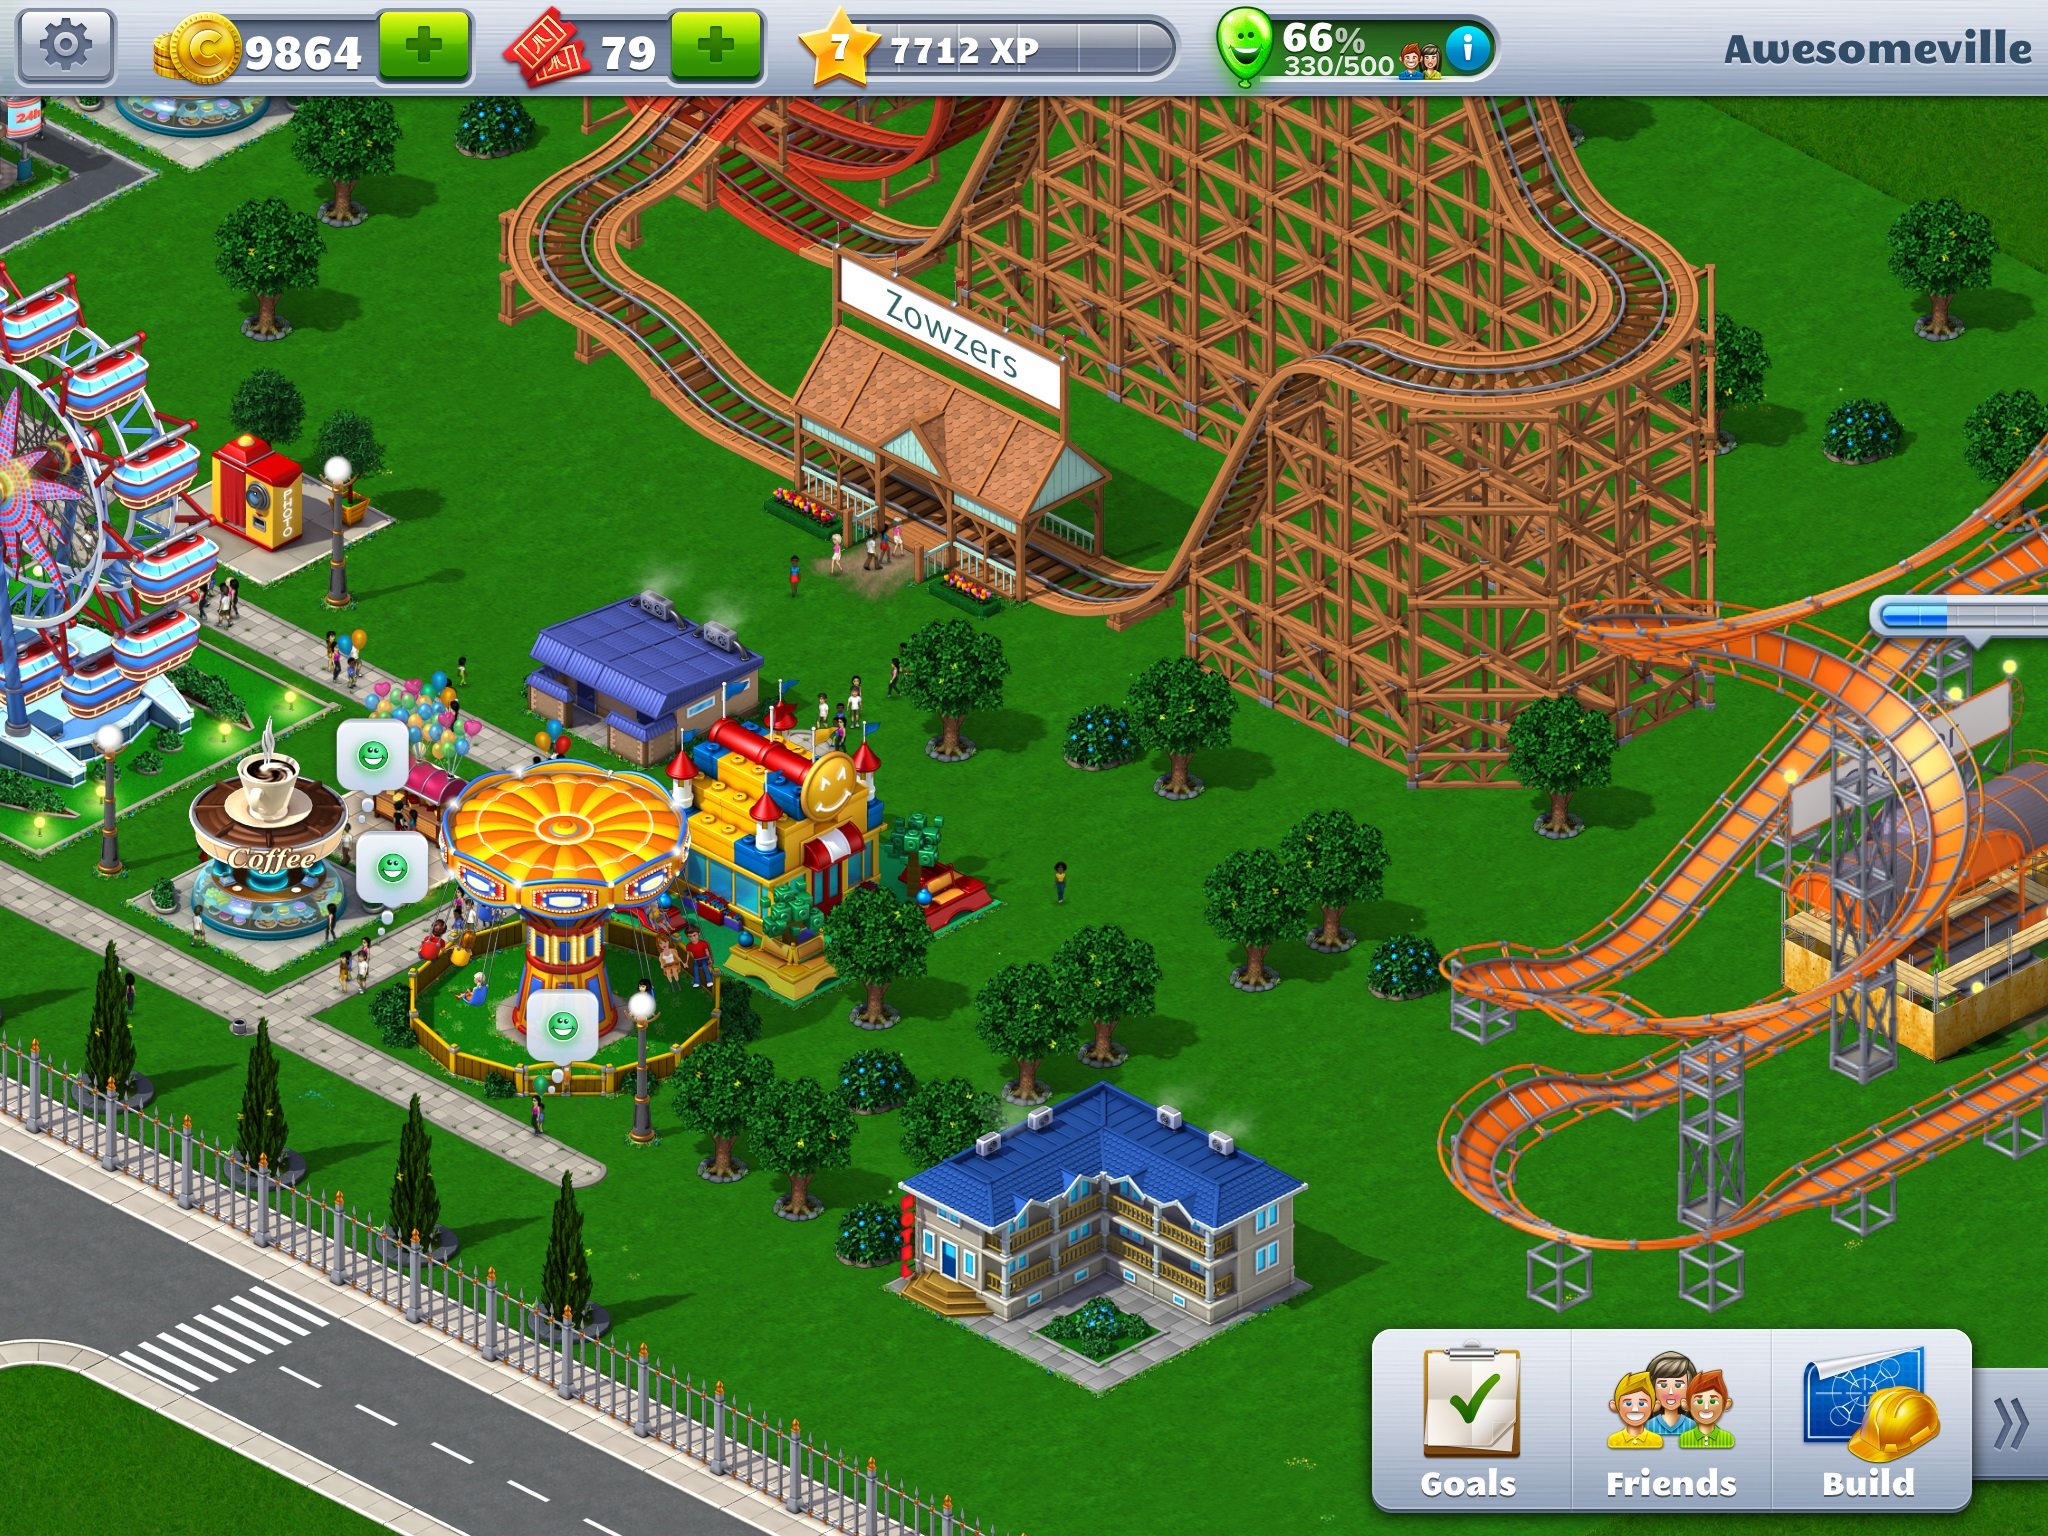 RollerCoaster Tycoon Classic Gameplay (iOS / Android) Trailer 